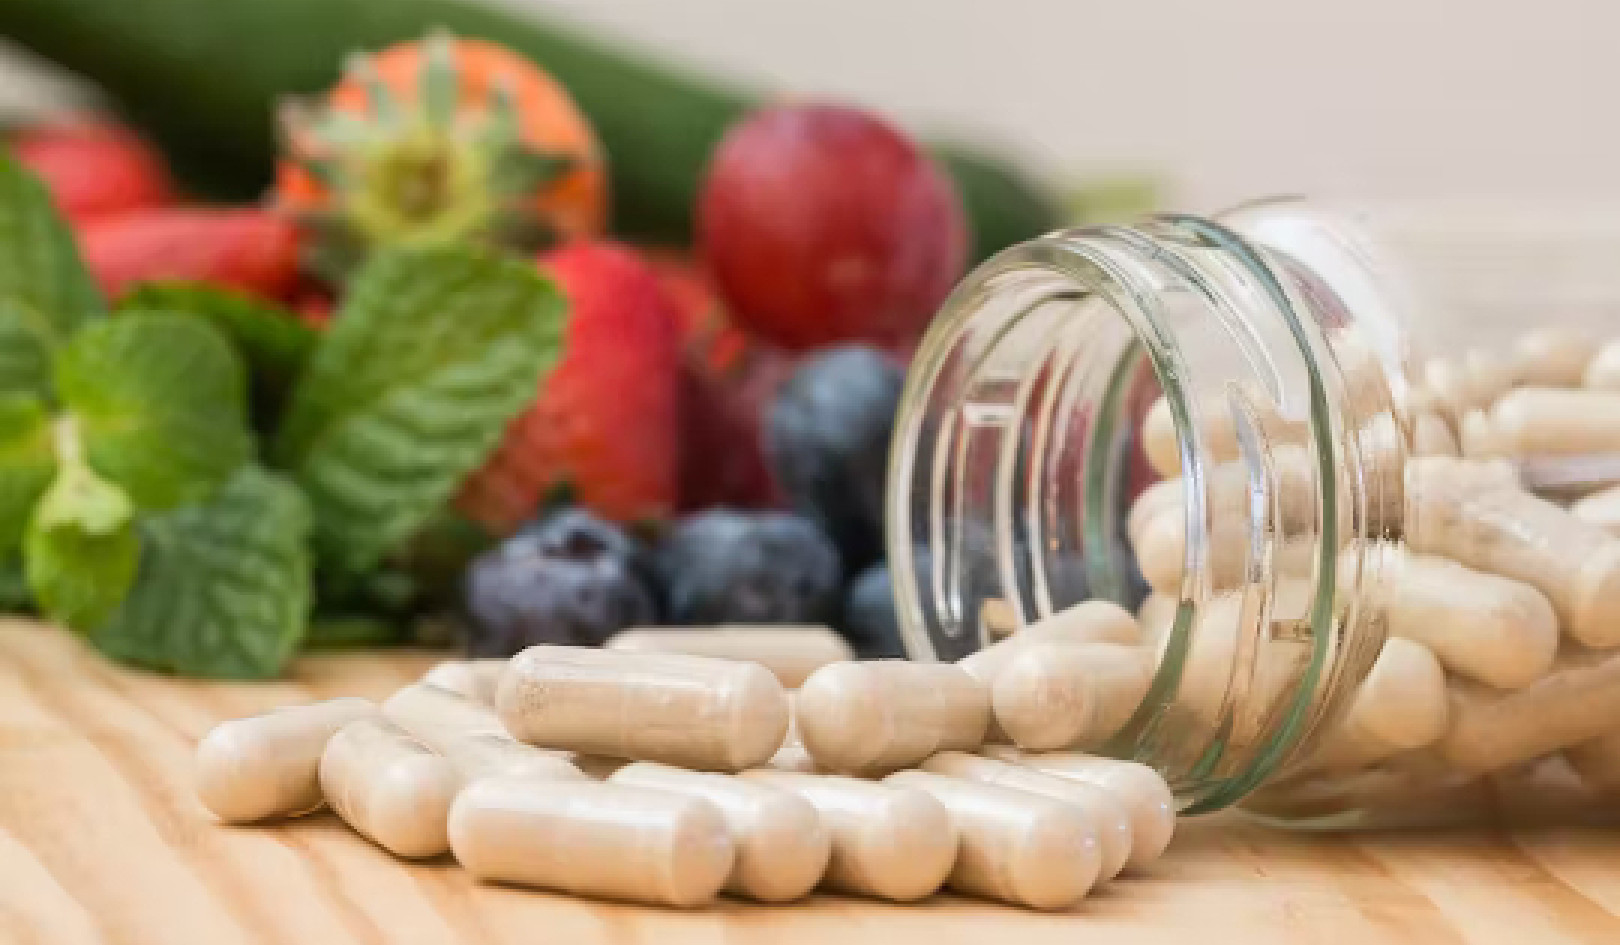 Taking Vitamins and Supplements? What You Need to Know Now